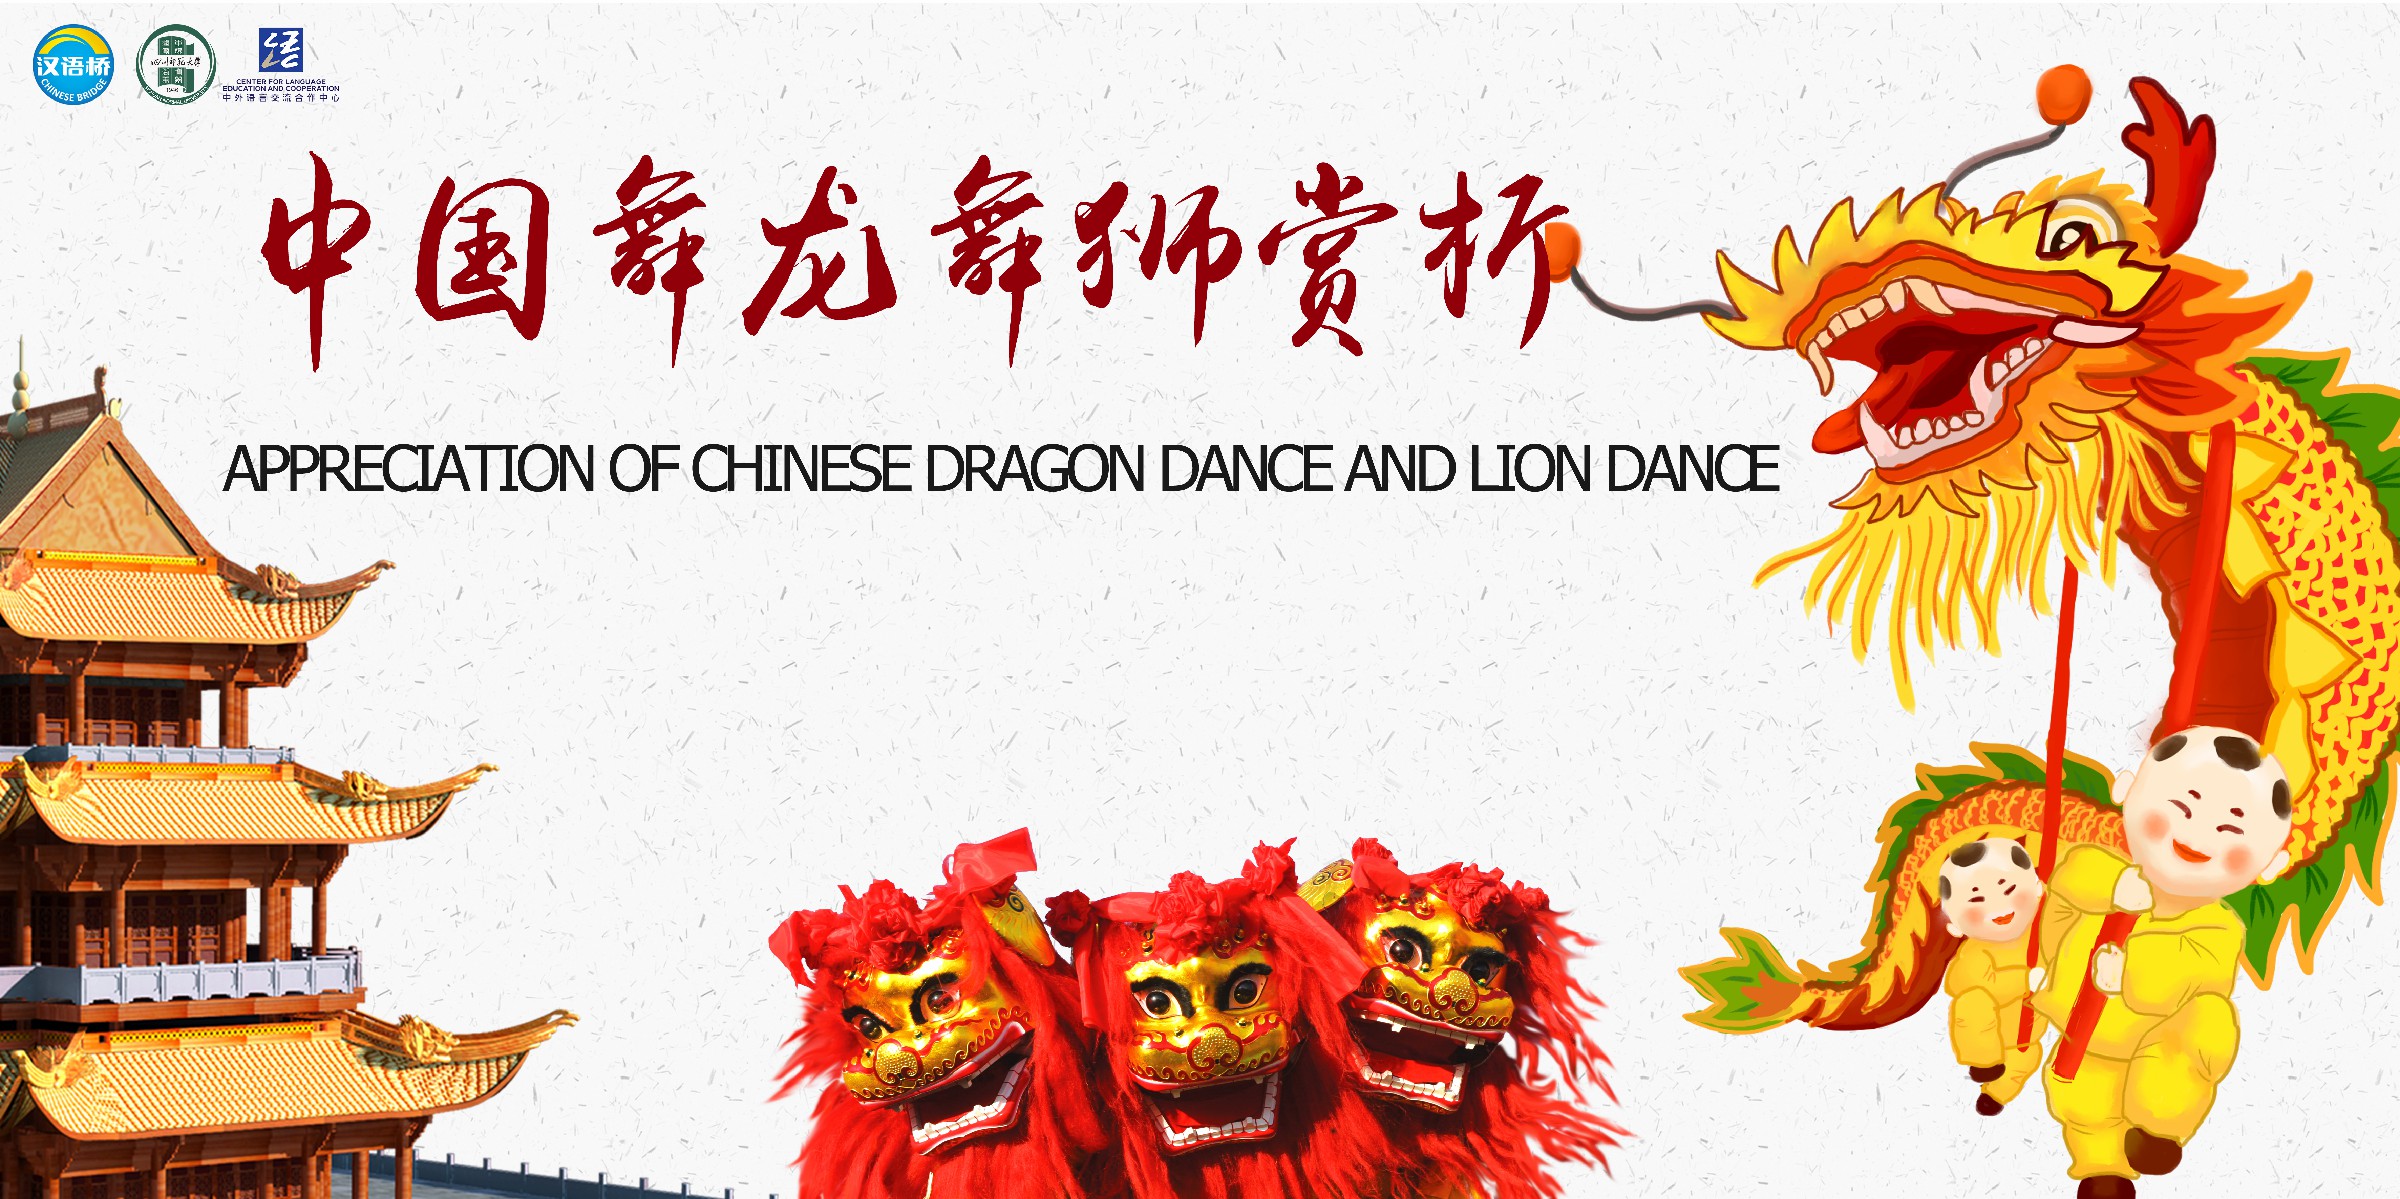 Appreciation of Chinese dragon dance and lion dance